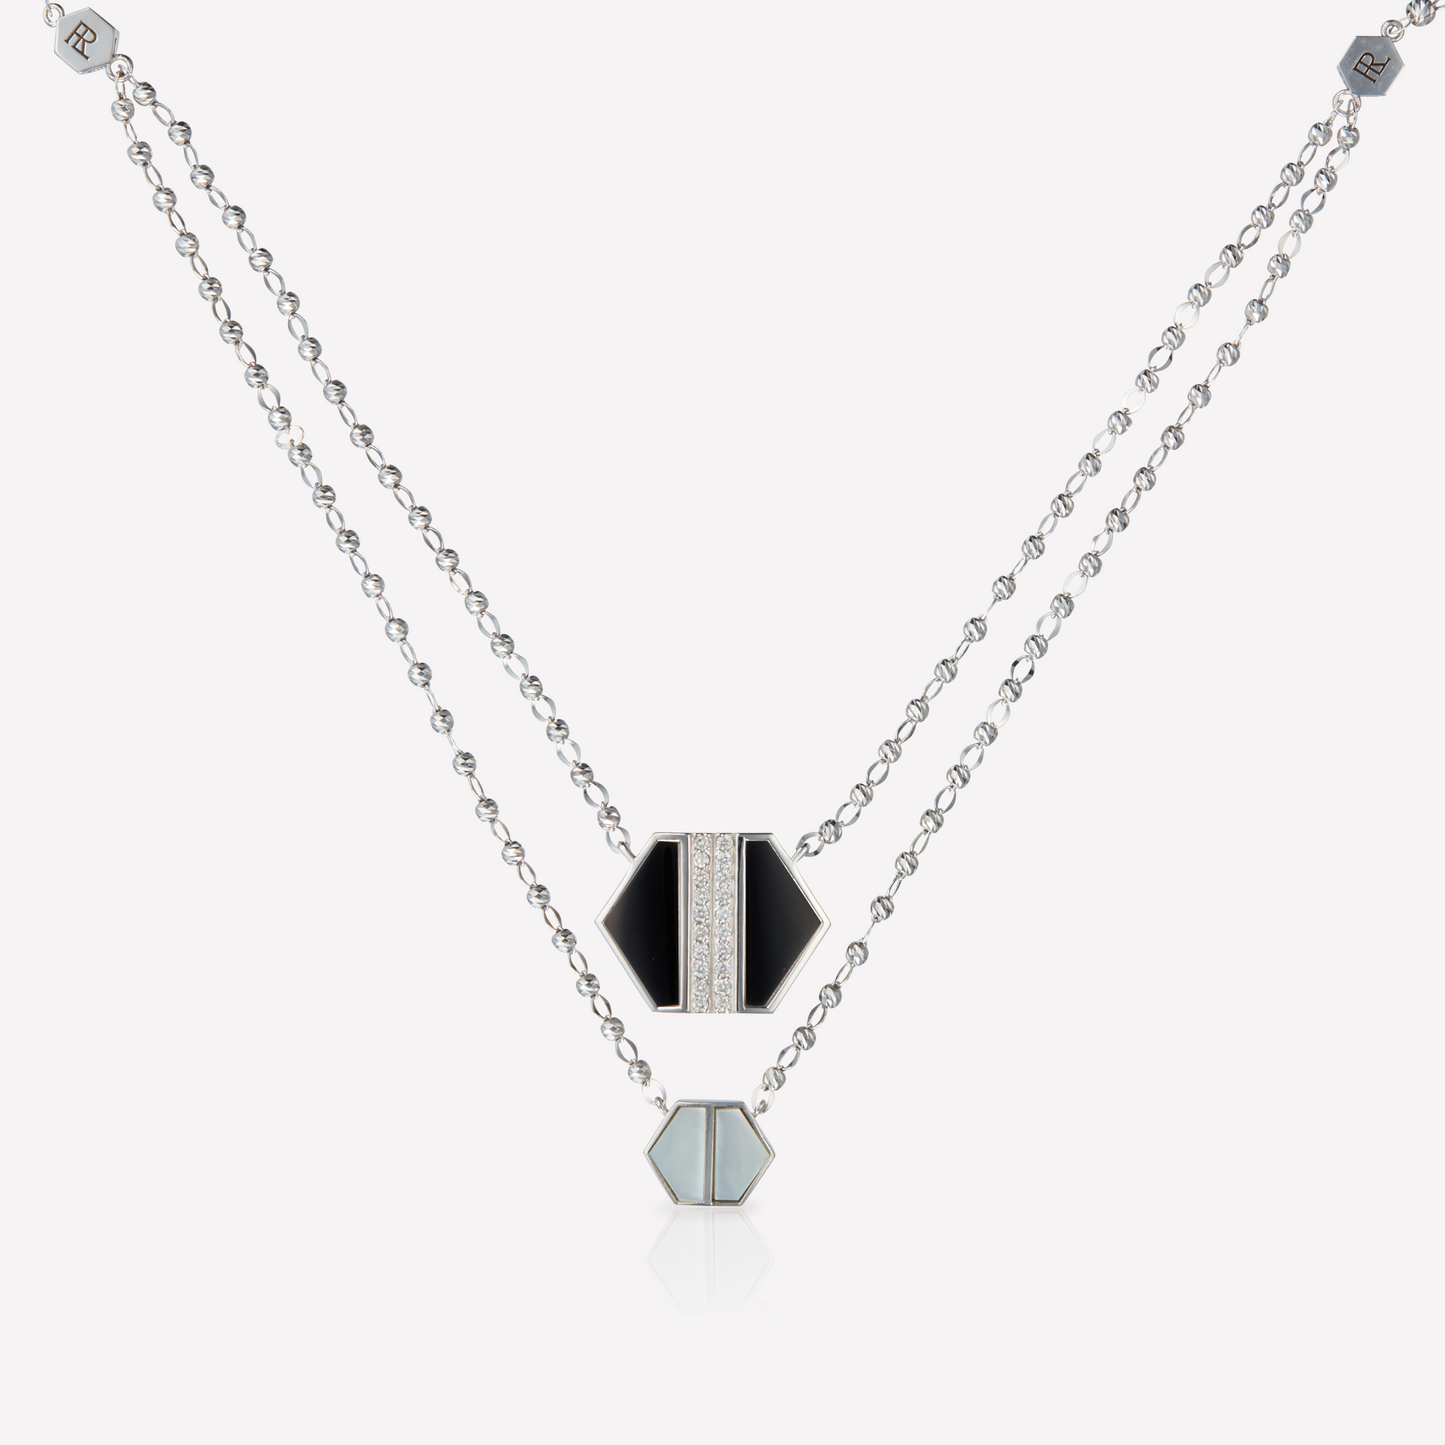 VOID Filled By You Collier, Grand, Spinel Noir, Diamant G